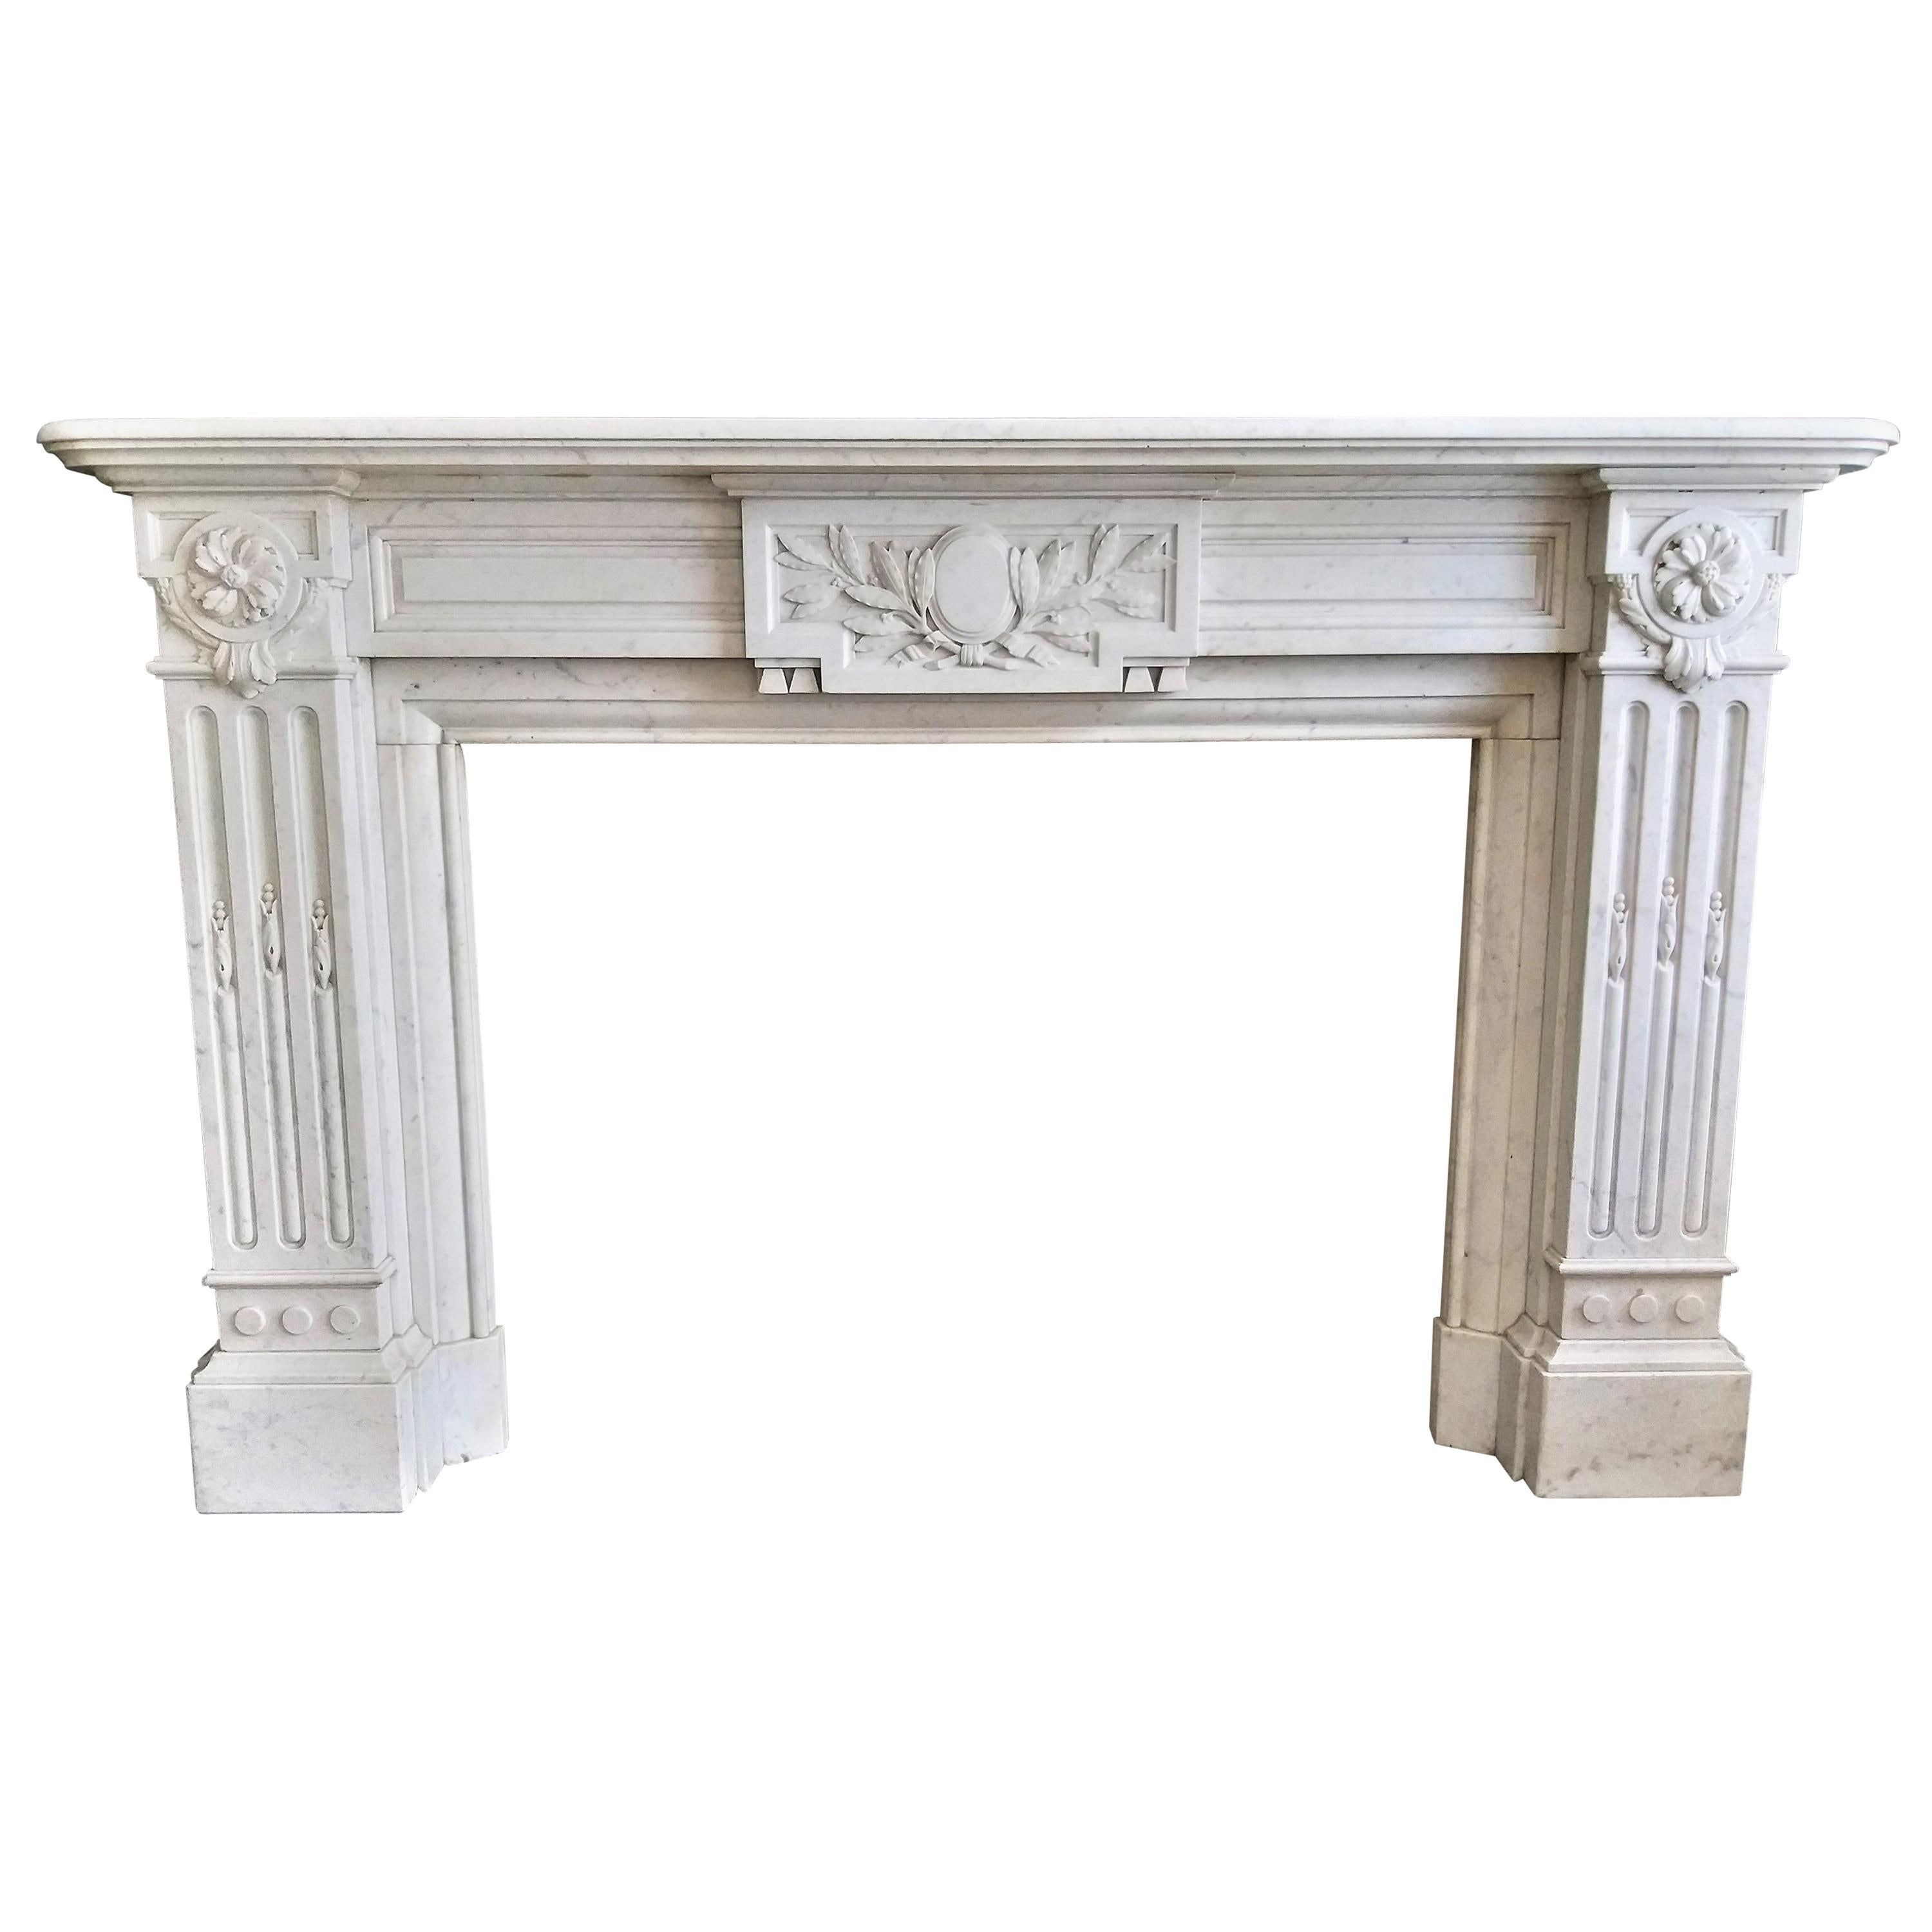  CARRARA Marble Fireplace Late 19th Century For Sale